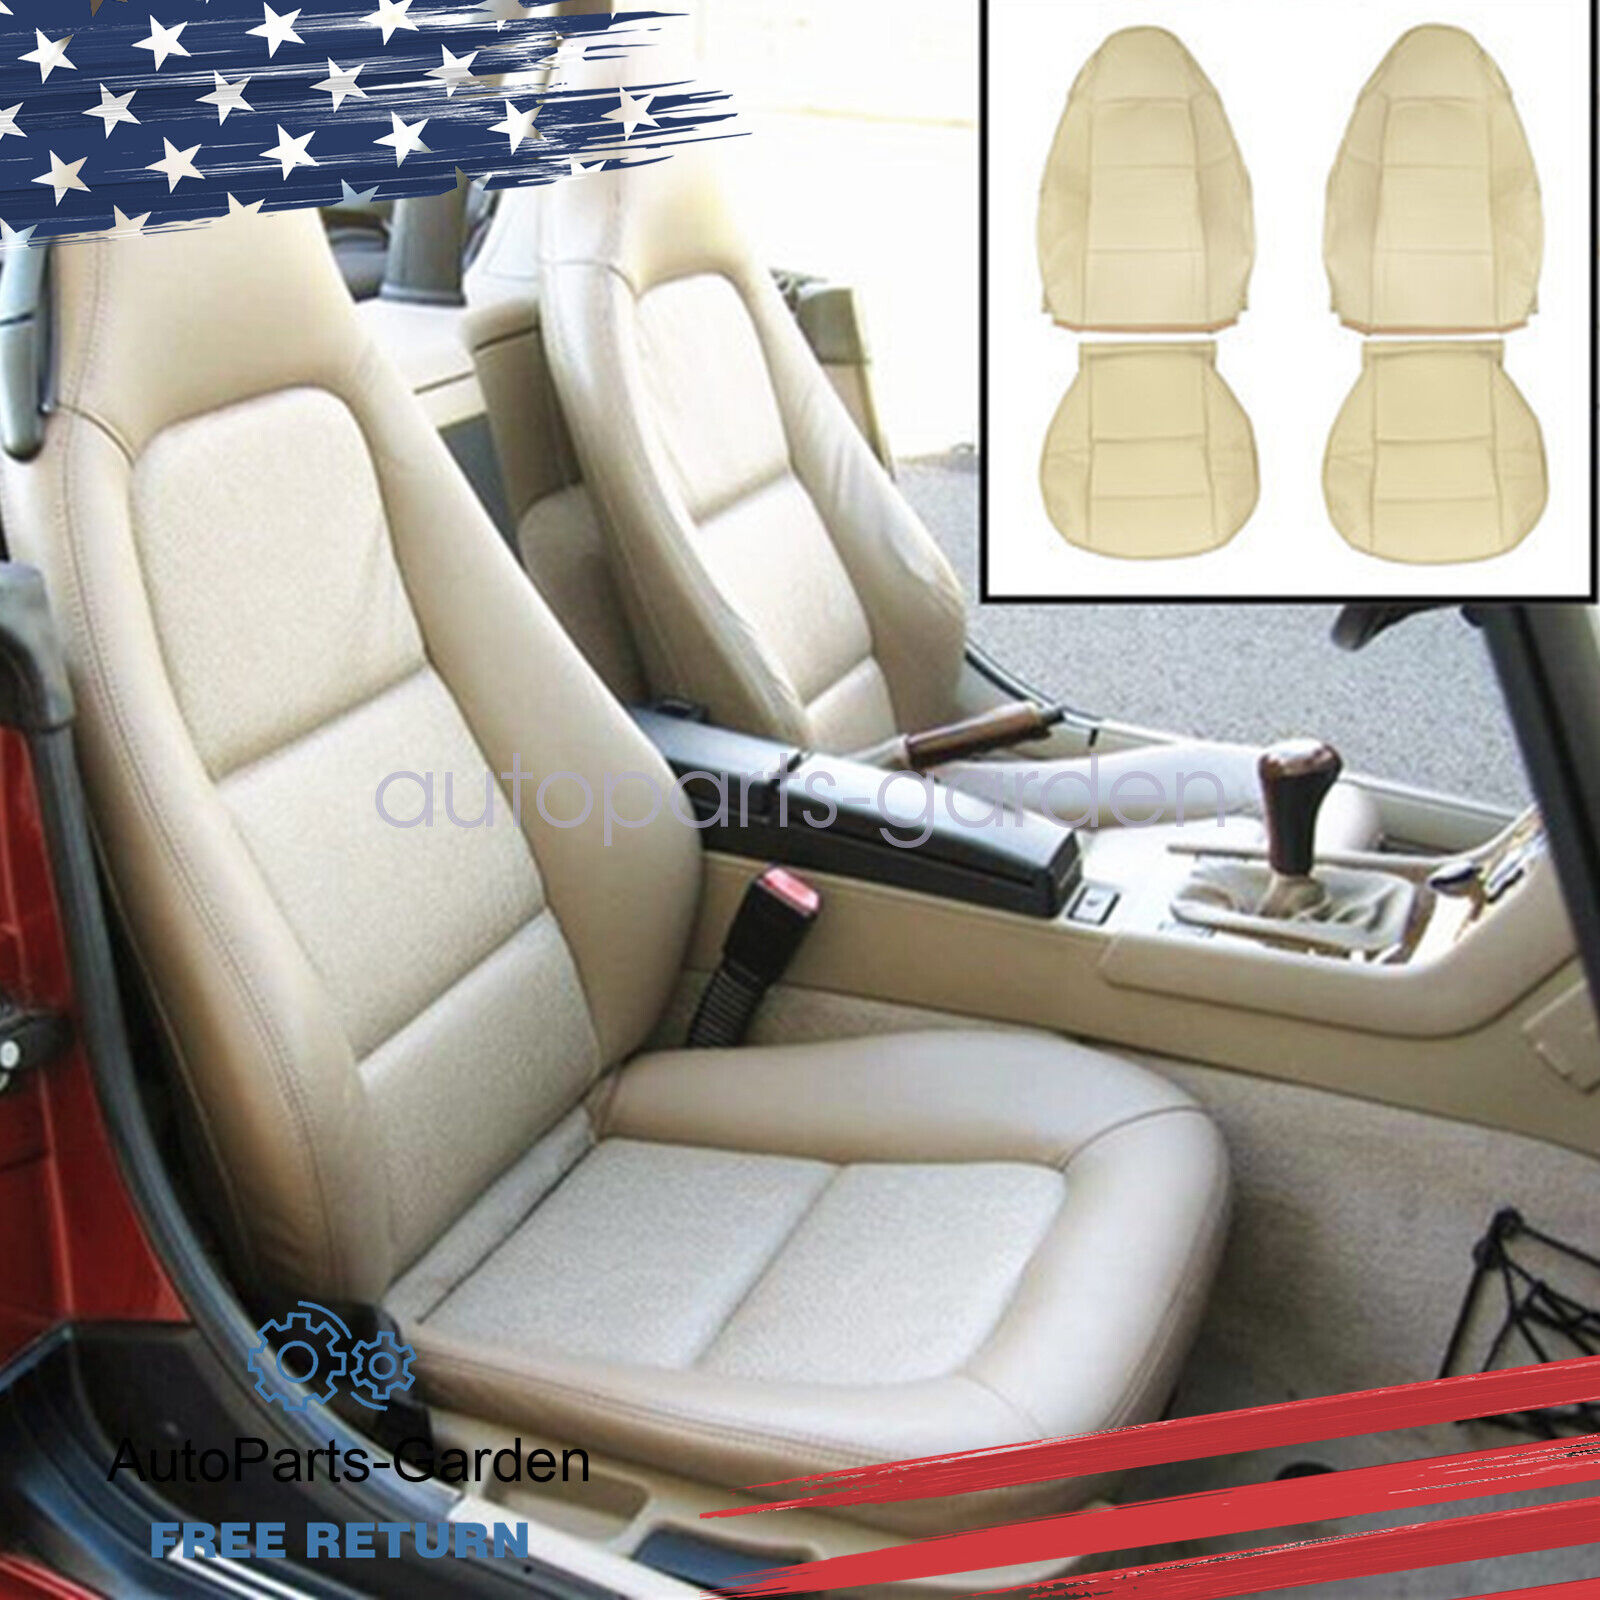 Fits BMW Z3 1999 2000 2001 2002 Full Surround 2 Front Leather Seat Covers Beige